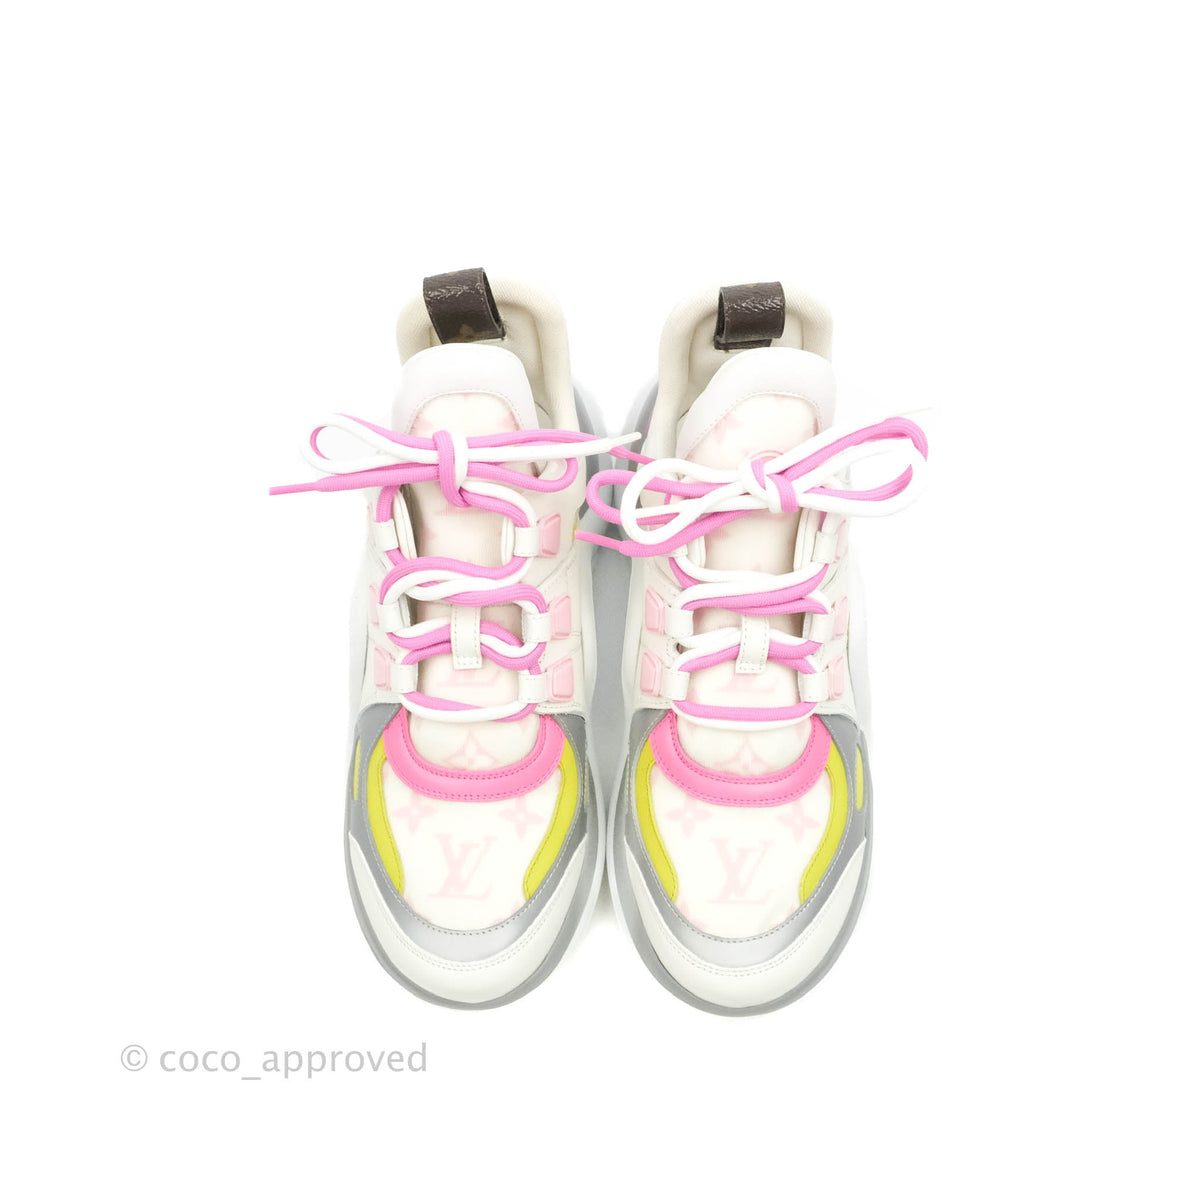 Louis Vuitton Arclight Line Sneakers Rose Claire 1A4X77